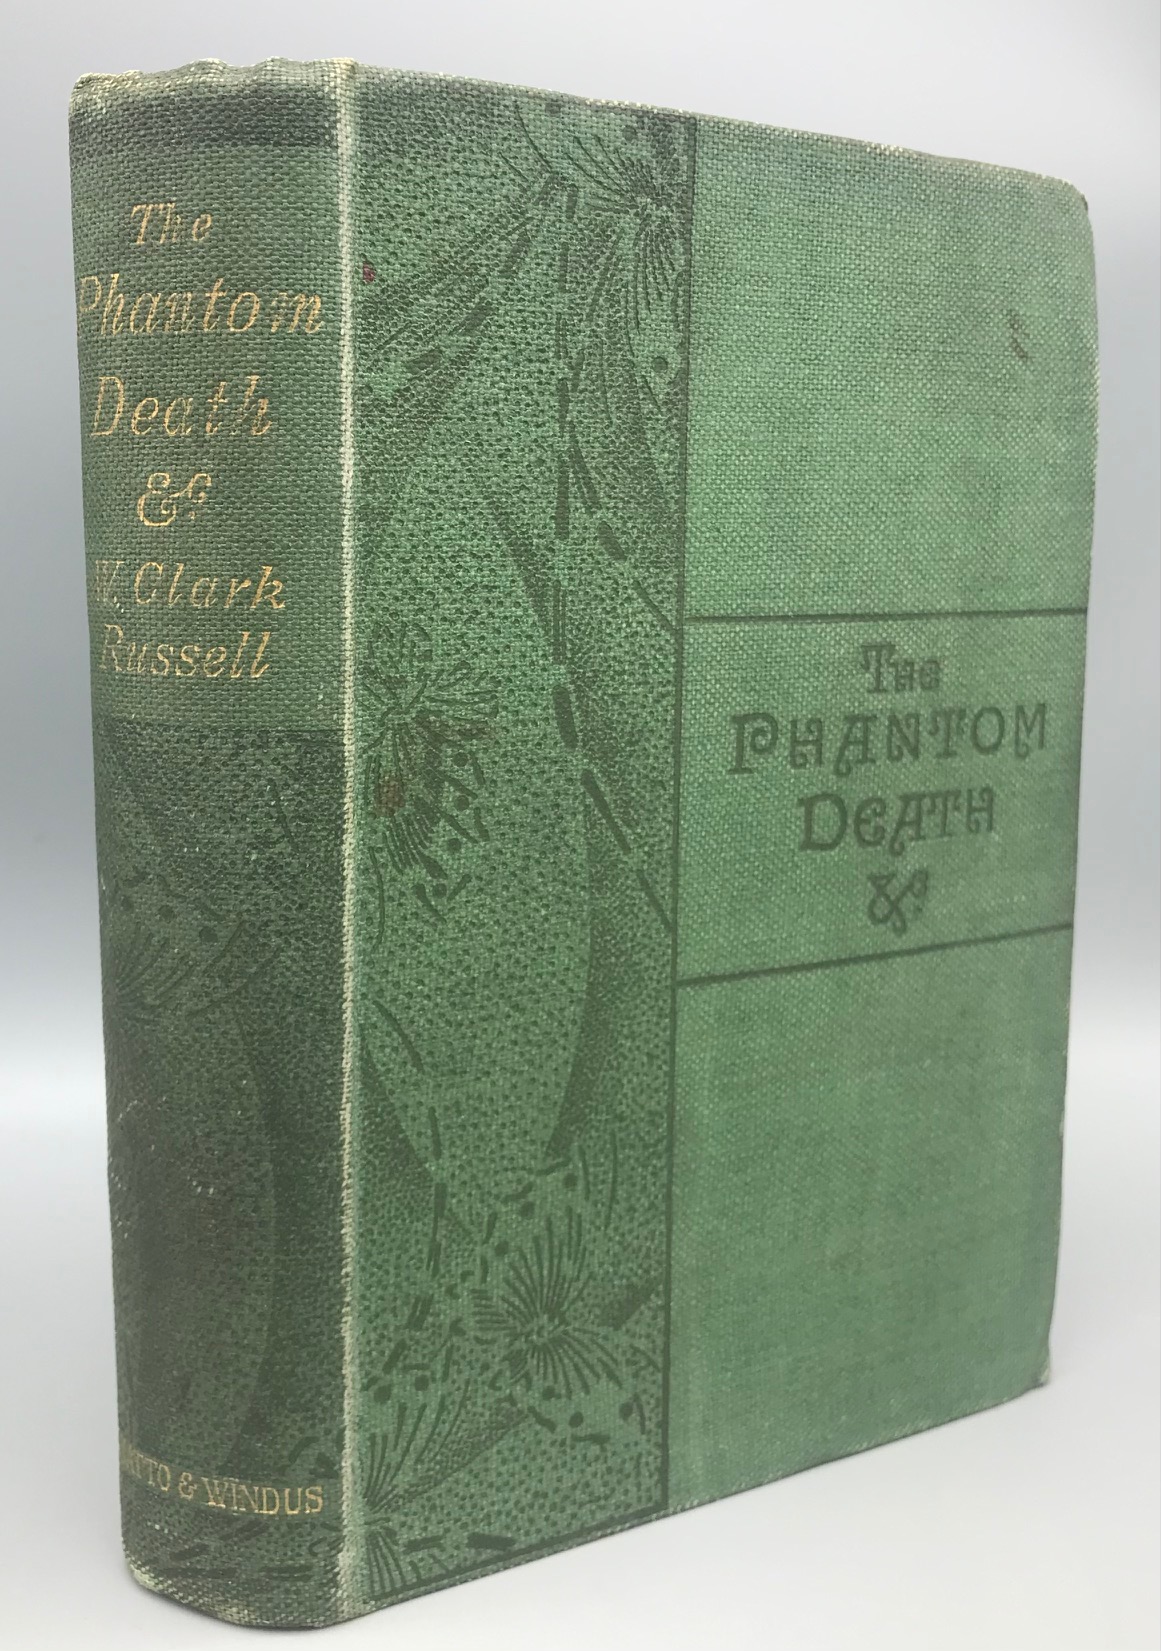 THE PHANTOM DEATH AND OTHER STORIES, by W. Clark Russell - 1895 [1st Ed.]